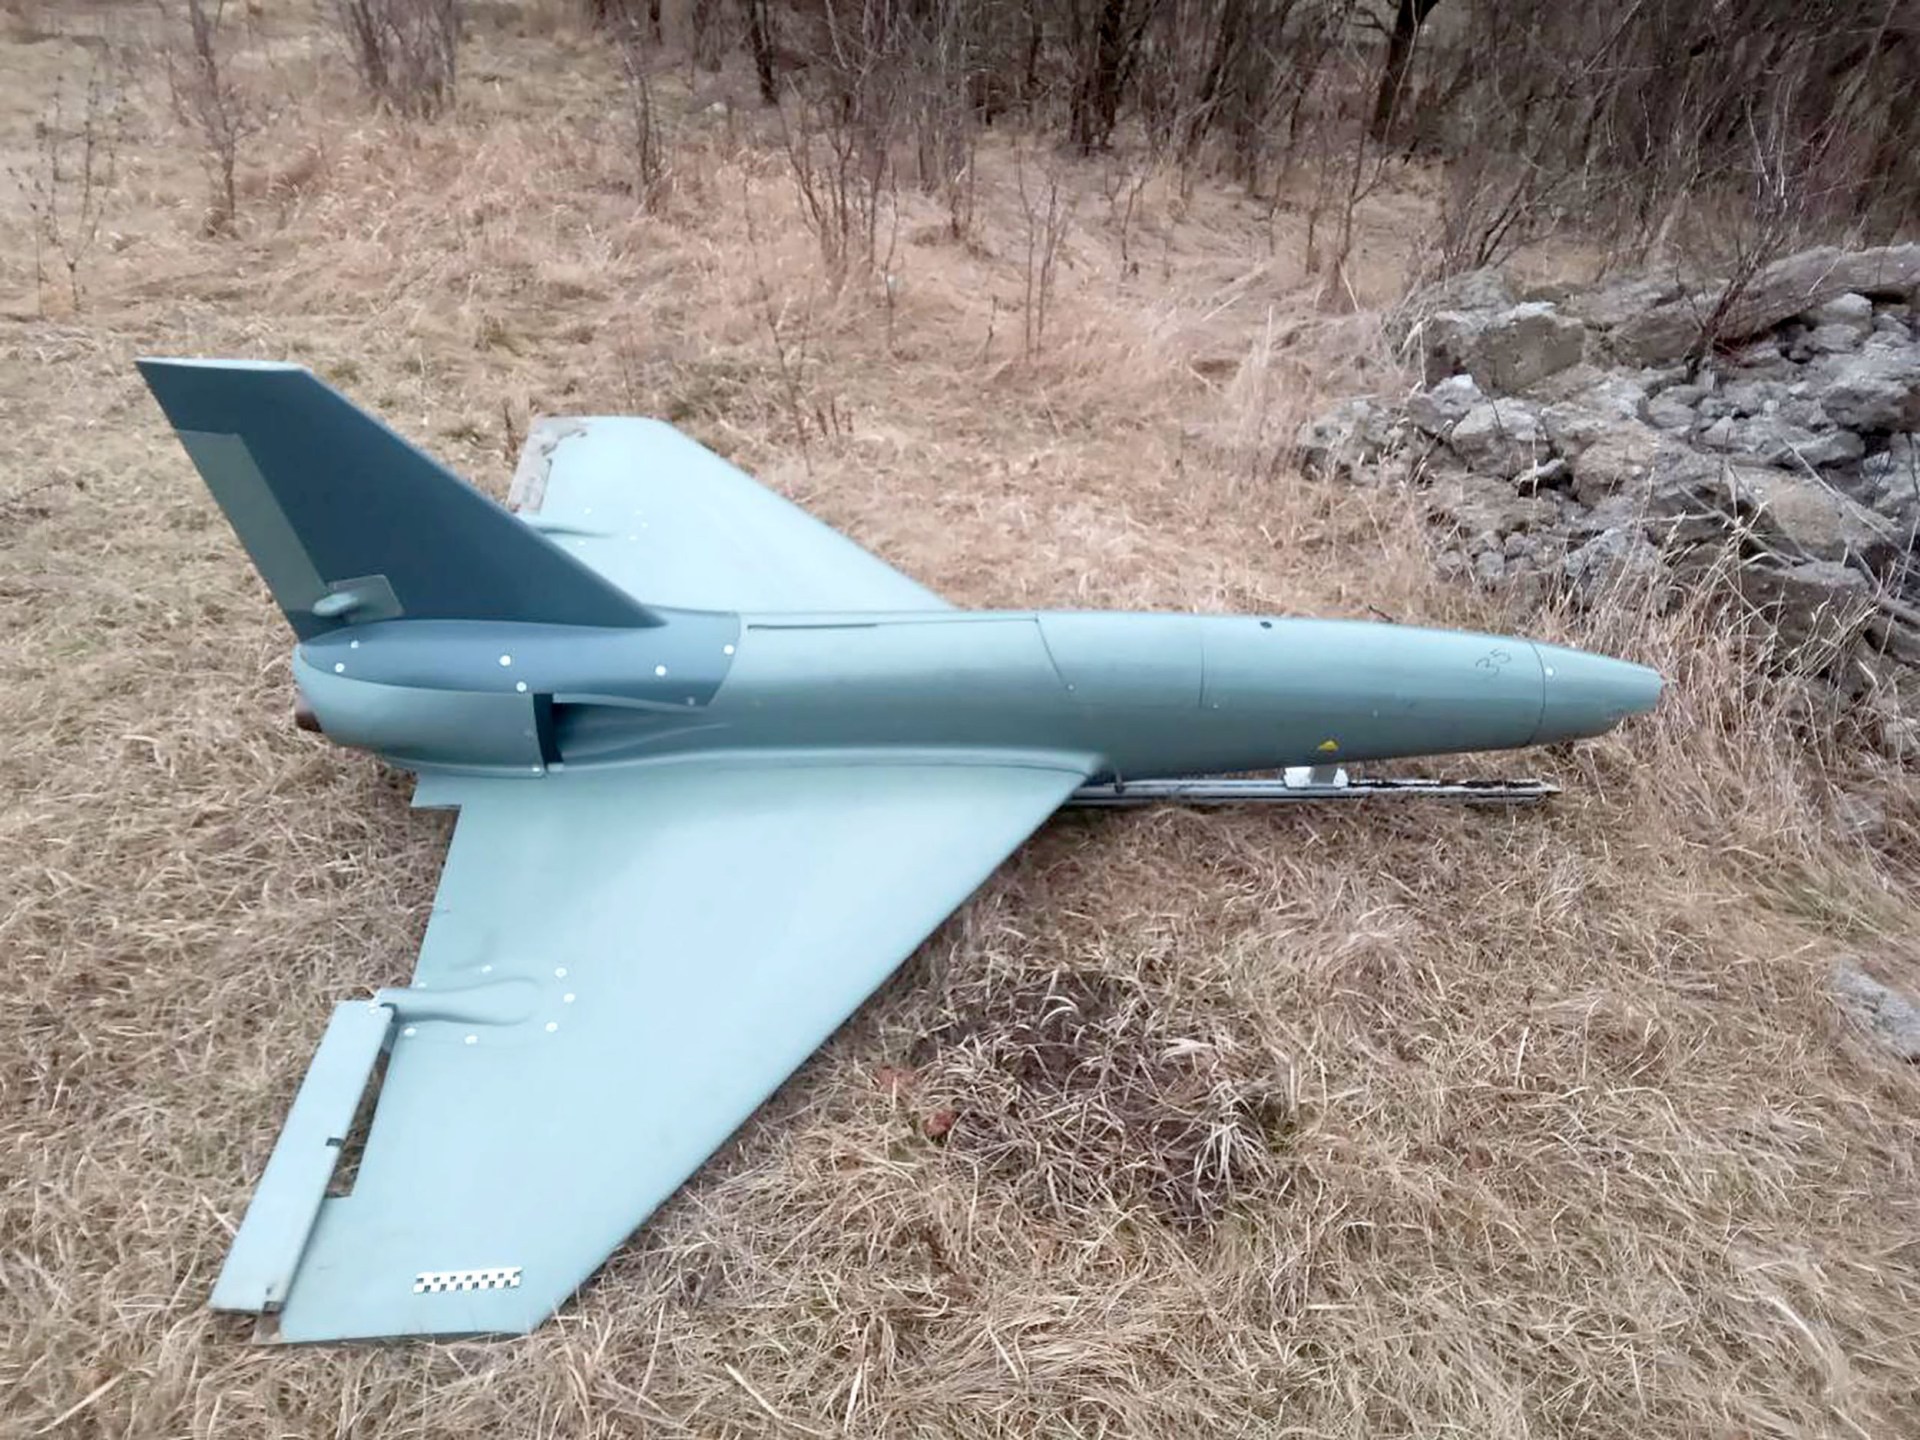 russia captures british 'kamikaze' drone actually used for target practice